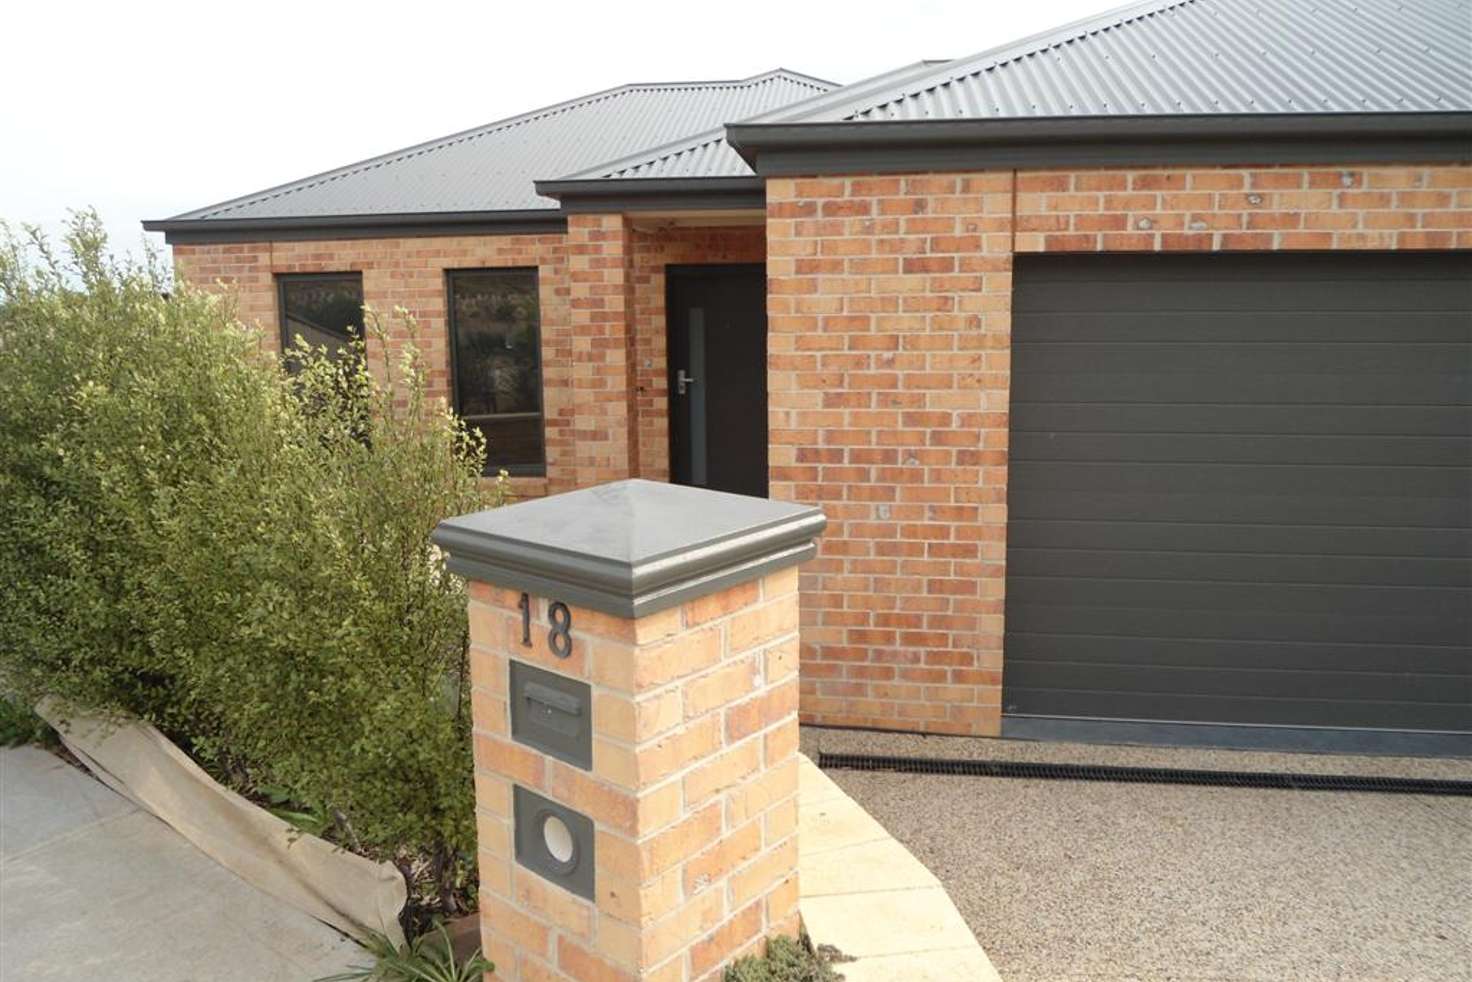 Main view of Homely house listing, 18 The Mews, Sunbury VIC 3429